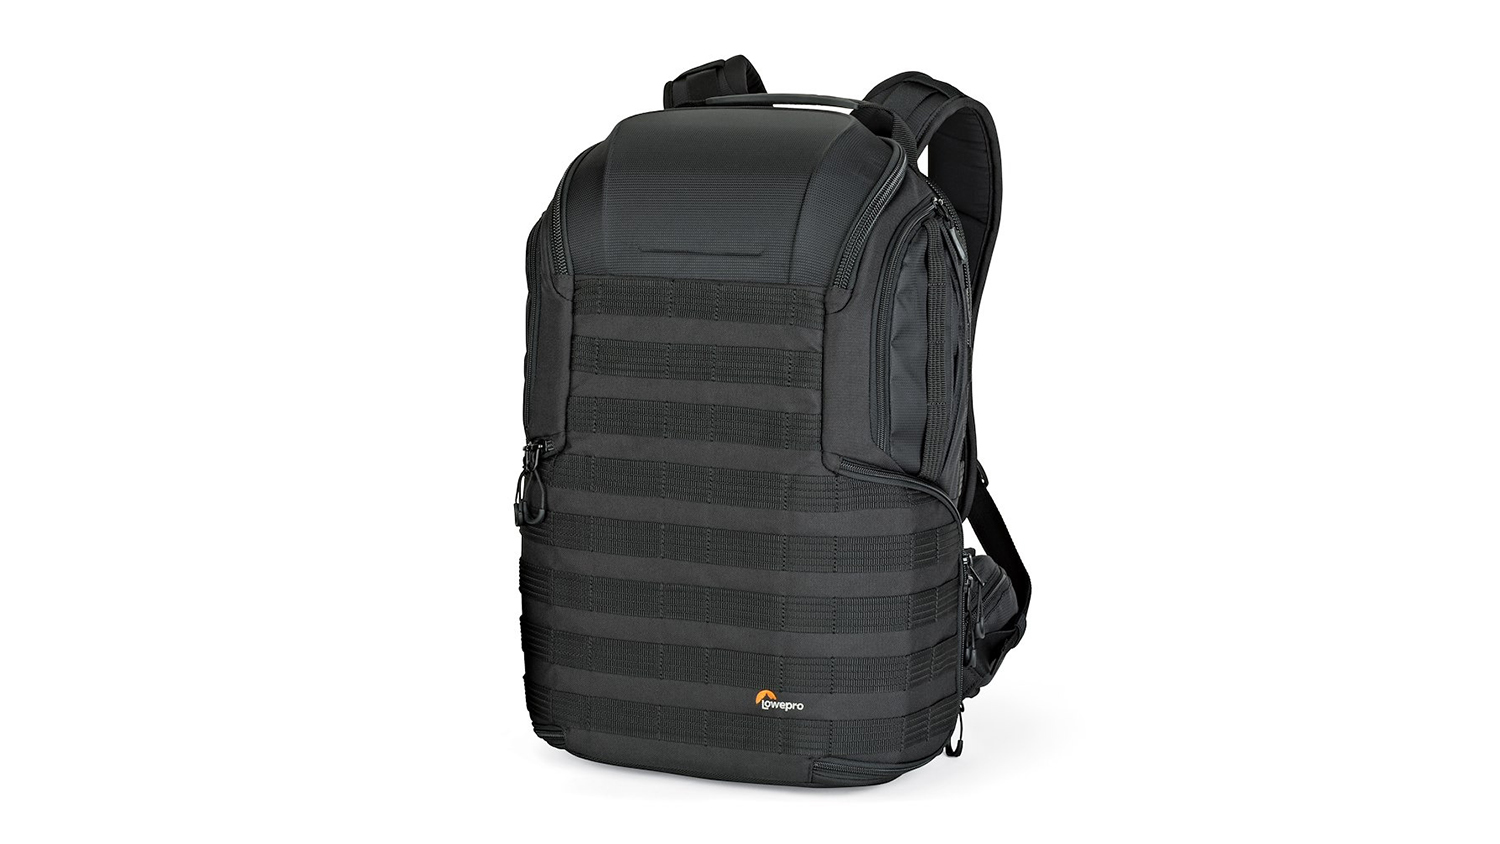 The Best Do Everything Camera Backpack? - Lowepro 450 AW II Review - YouTube